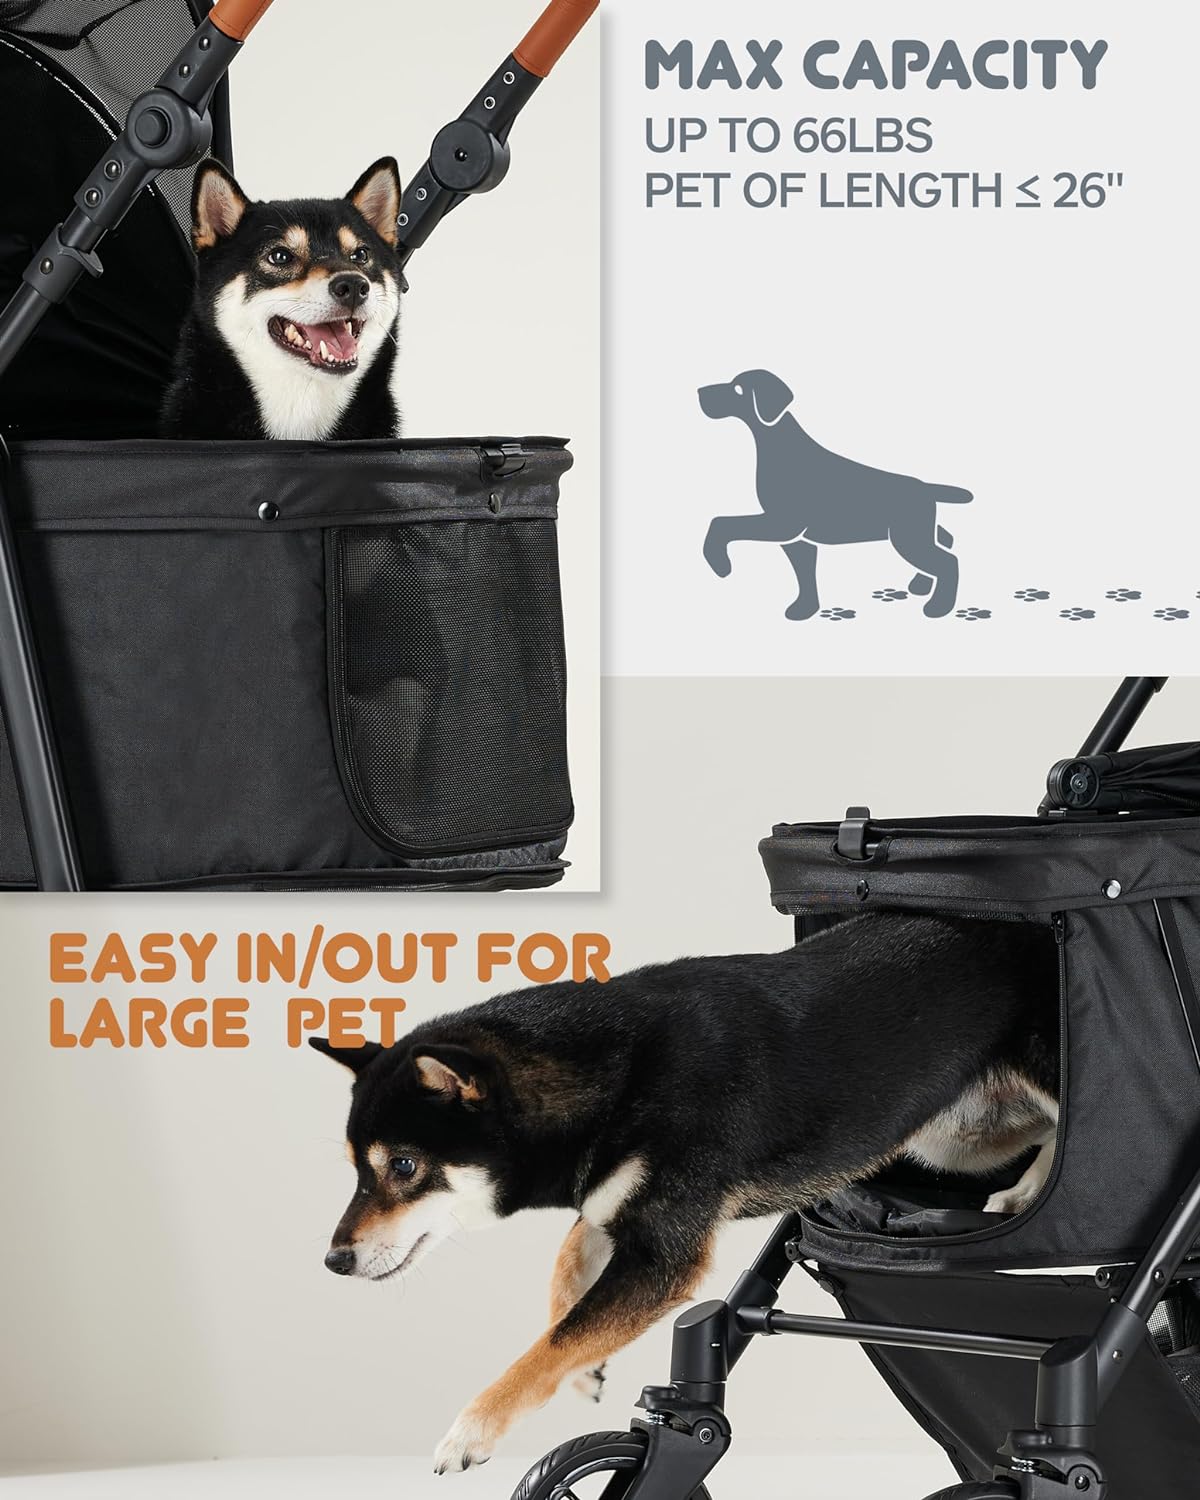 Zoosky 4 Wheels Medium Pet Stroller for Medium Large Dogs and Cats